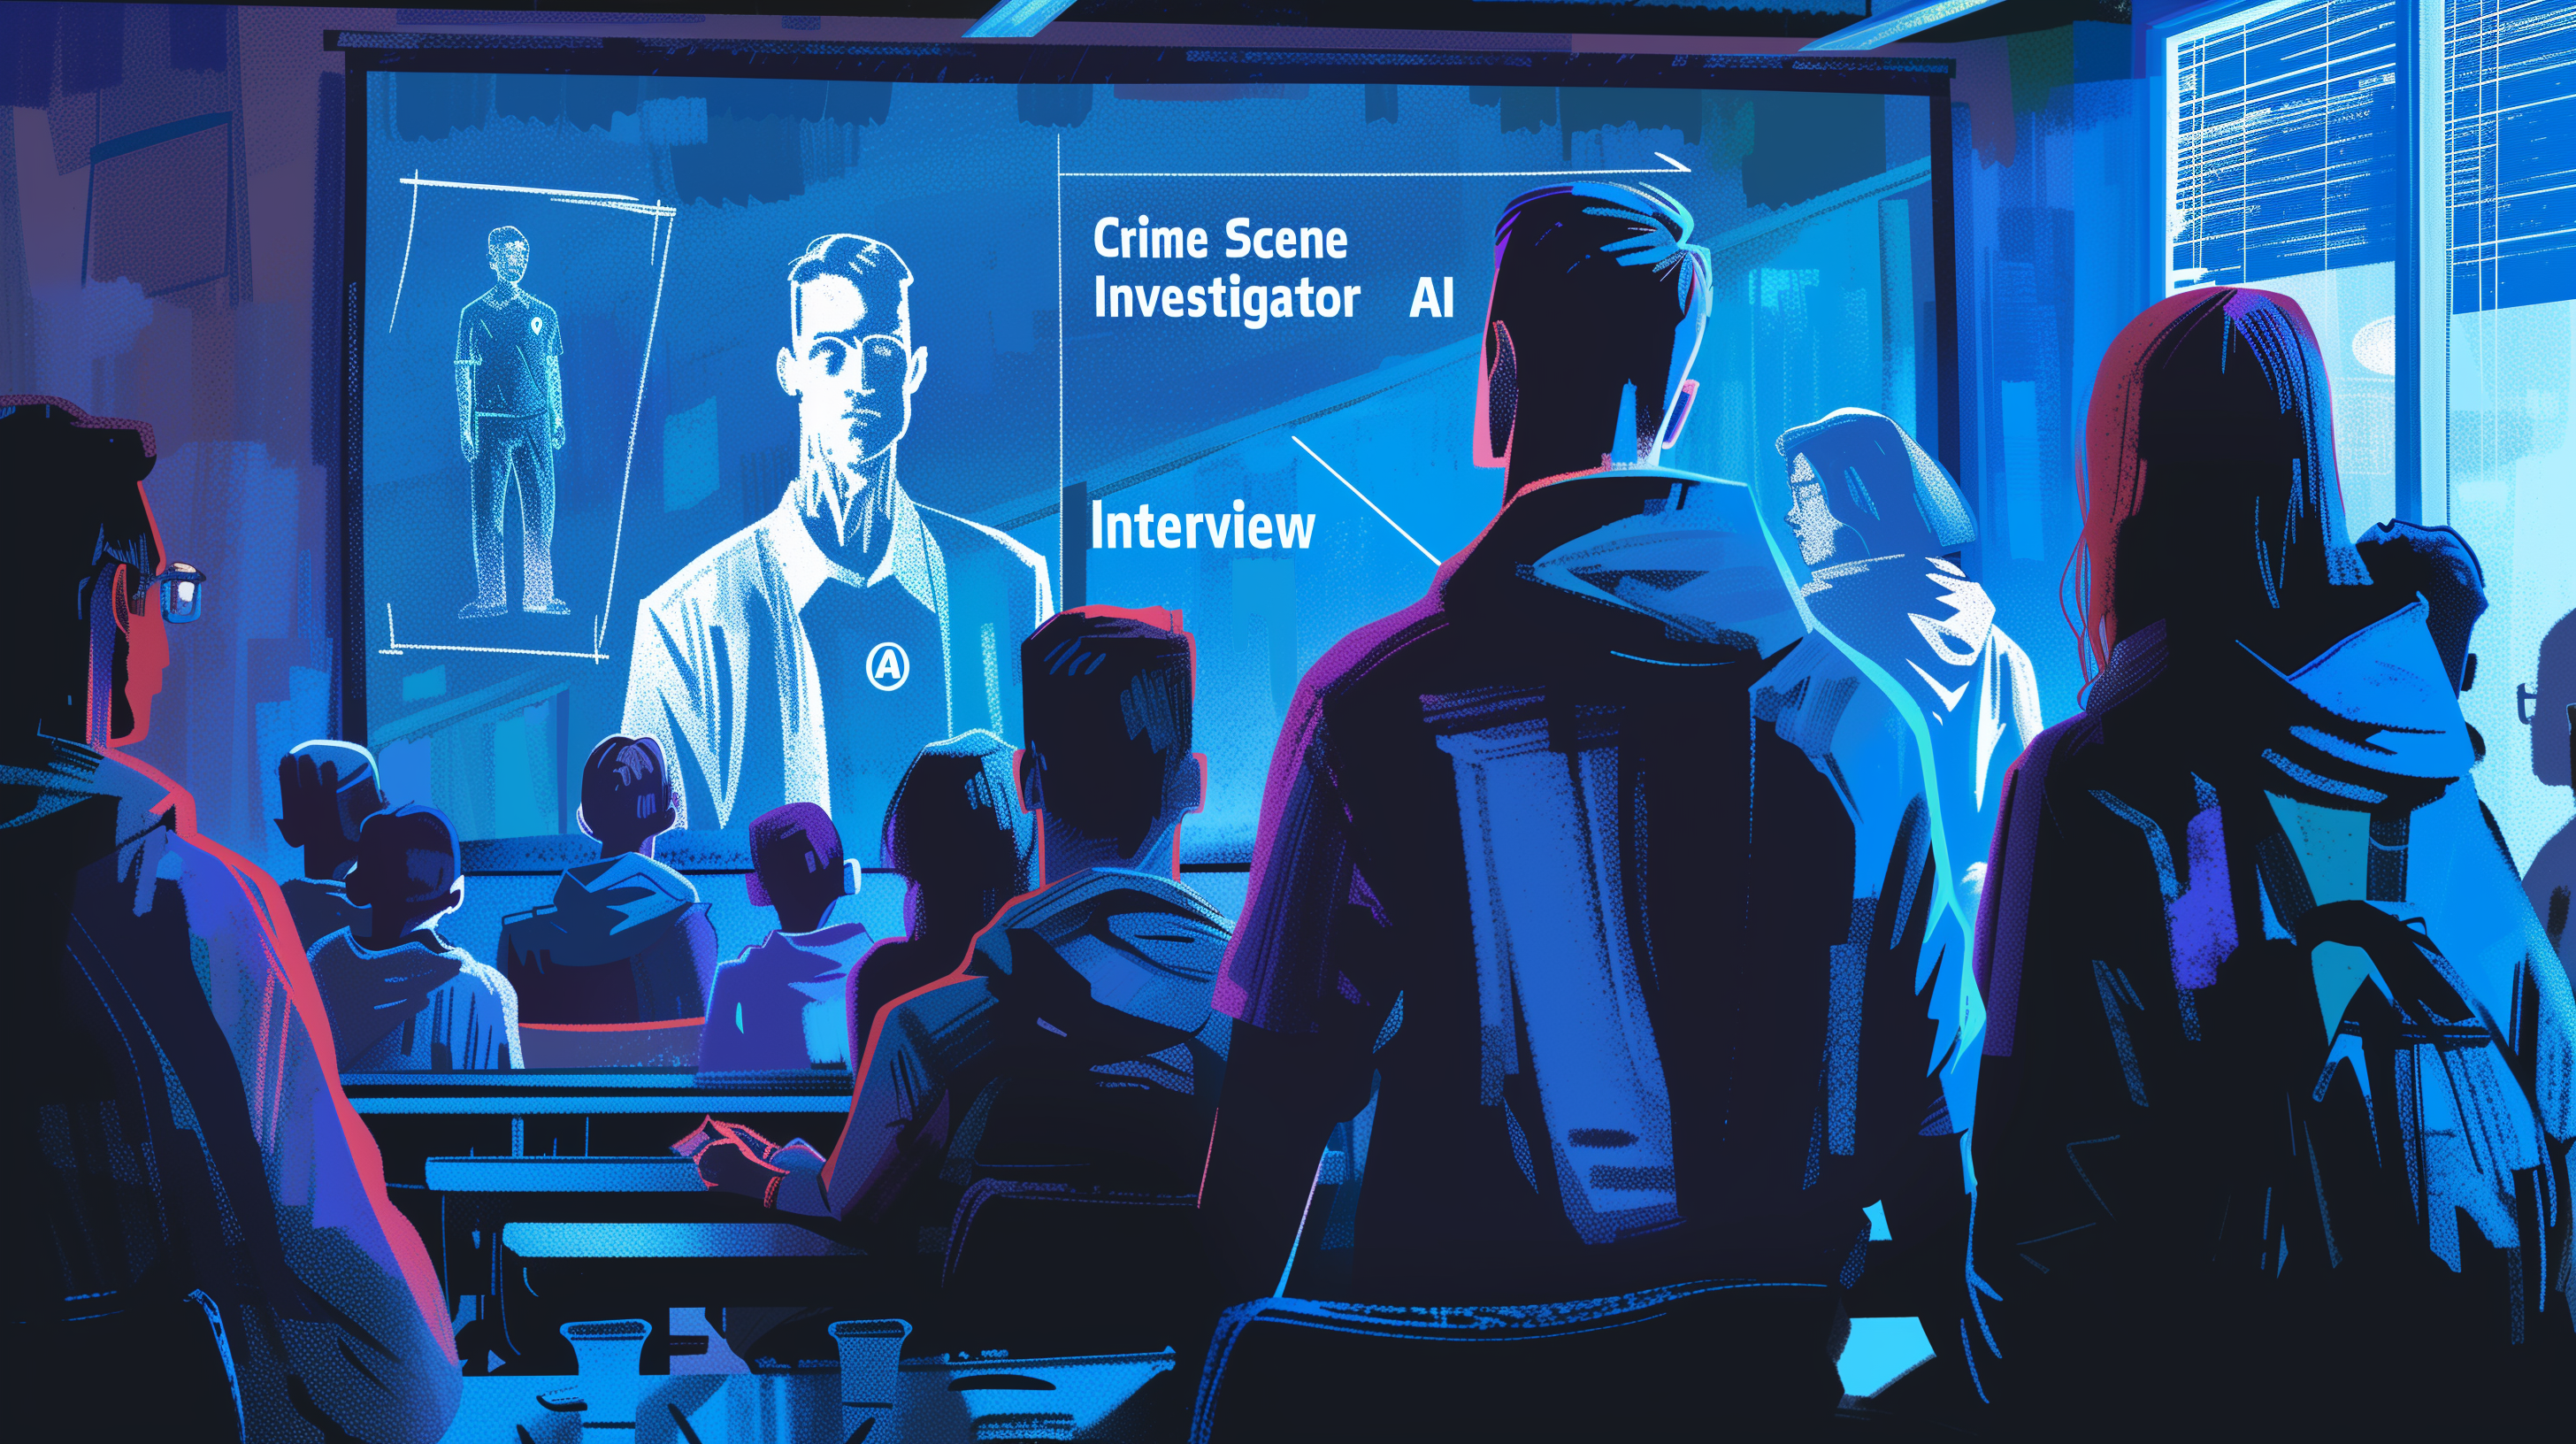 A classroom of students watches a large screen displaying an AI crime scene investigator being interviewed. The room is illuminated in blue tones, and the students are seated, attentively observing the presentation. The screen shows a detailed image of the AI investigator and text indicating the nature of the interview.